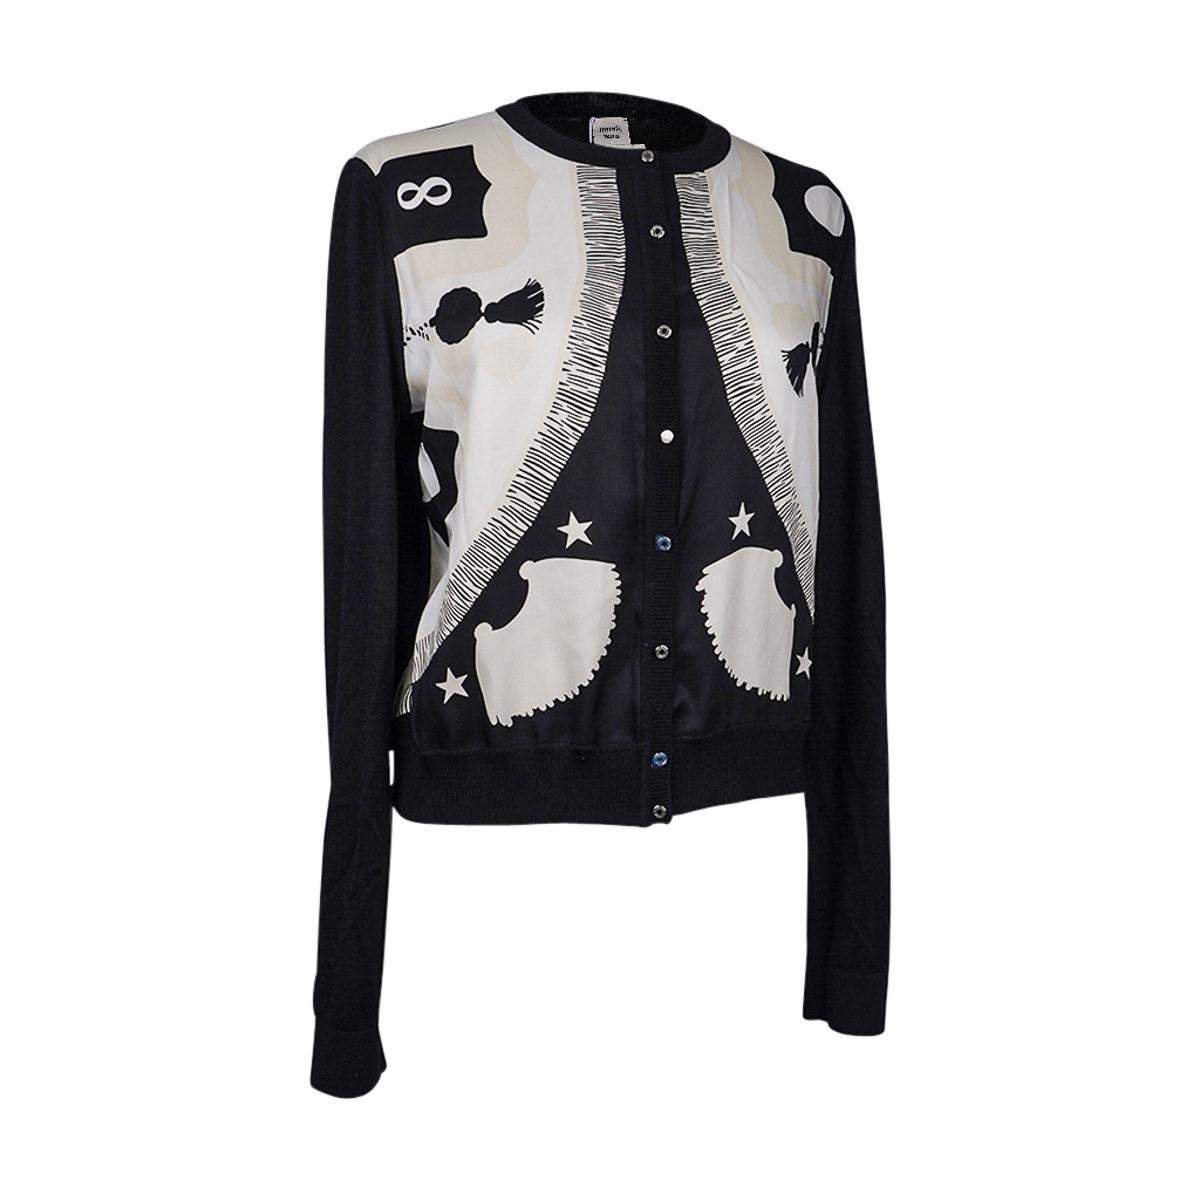 Mightychic offers an Hermes Poste et Cavalerie silk print Court twillaine cashmere cardigan.
Black and silk scarf print front has touches of nude beige.
8 small palladium plated clou de selle buttons.
Ribbing at sleeve and hip.
Sleeves and rear are